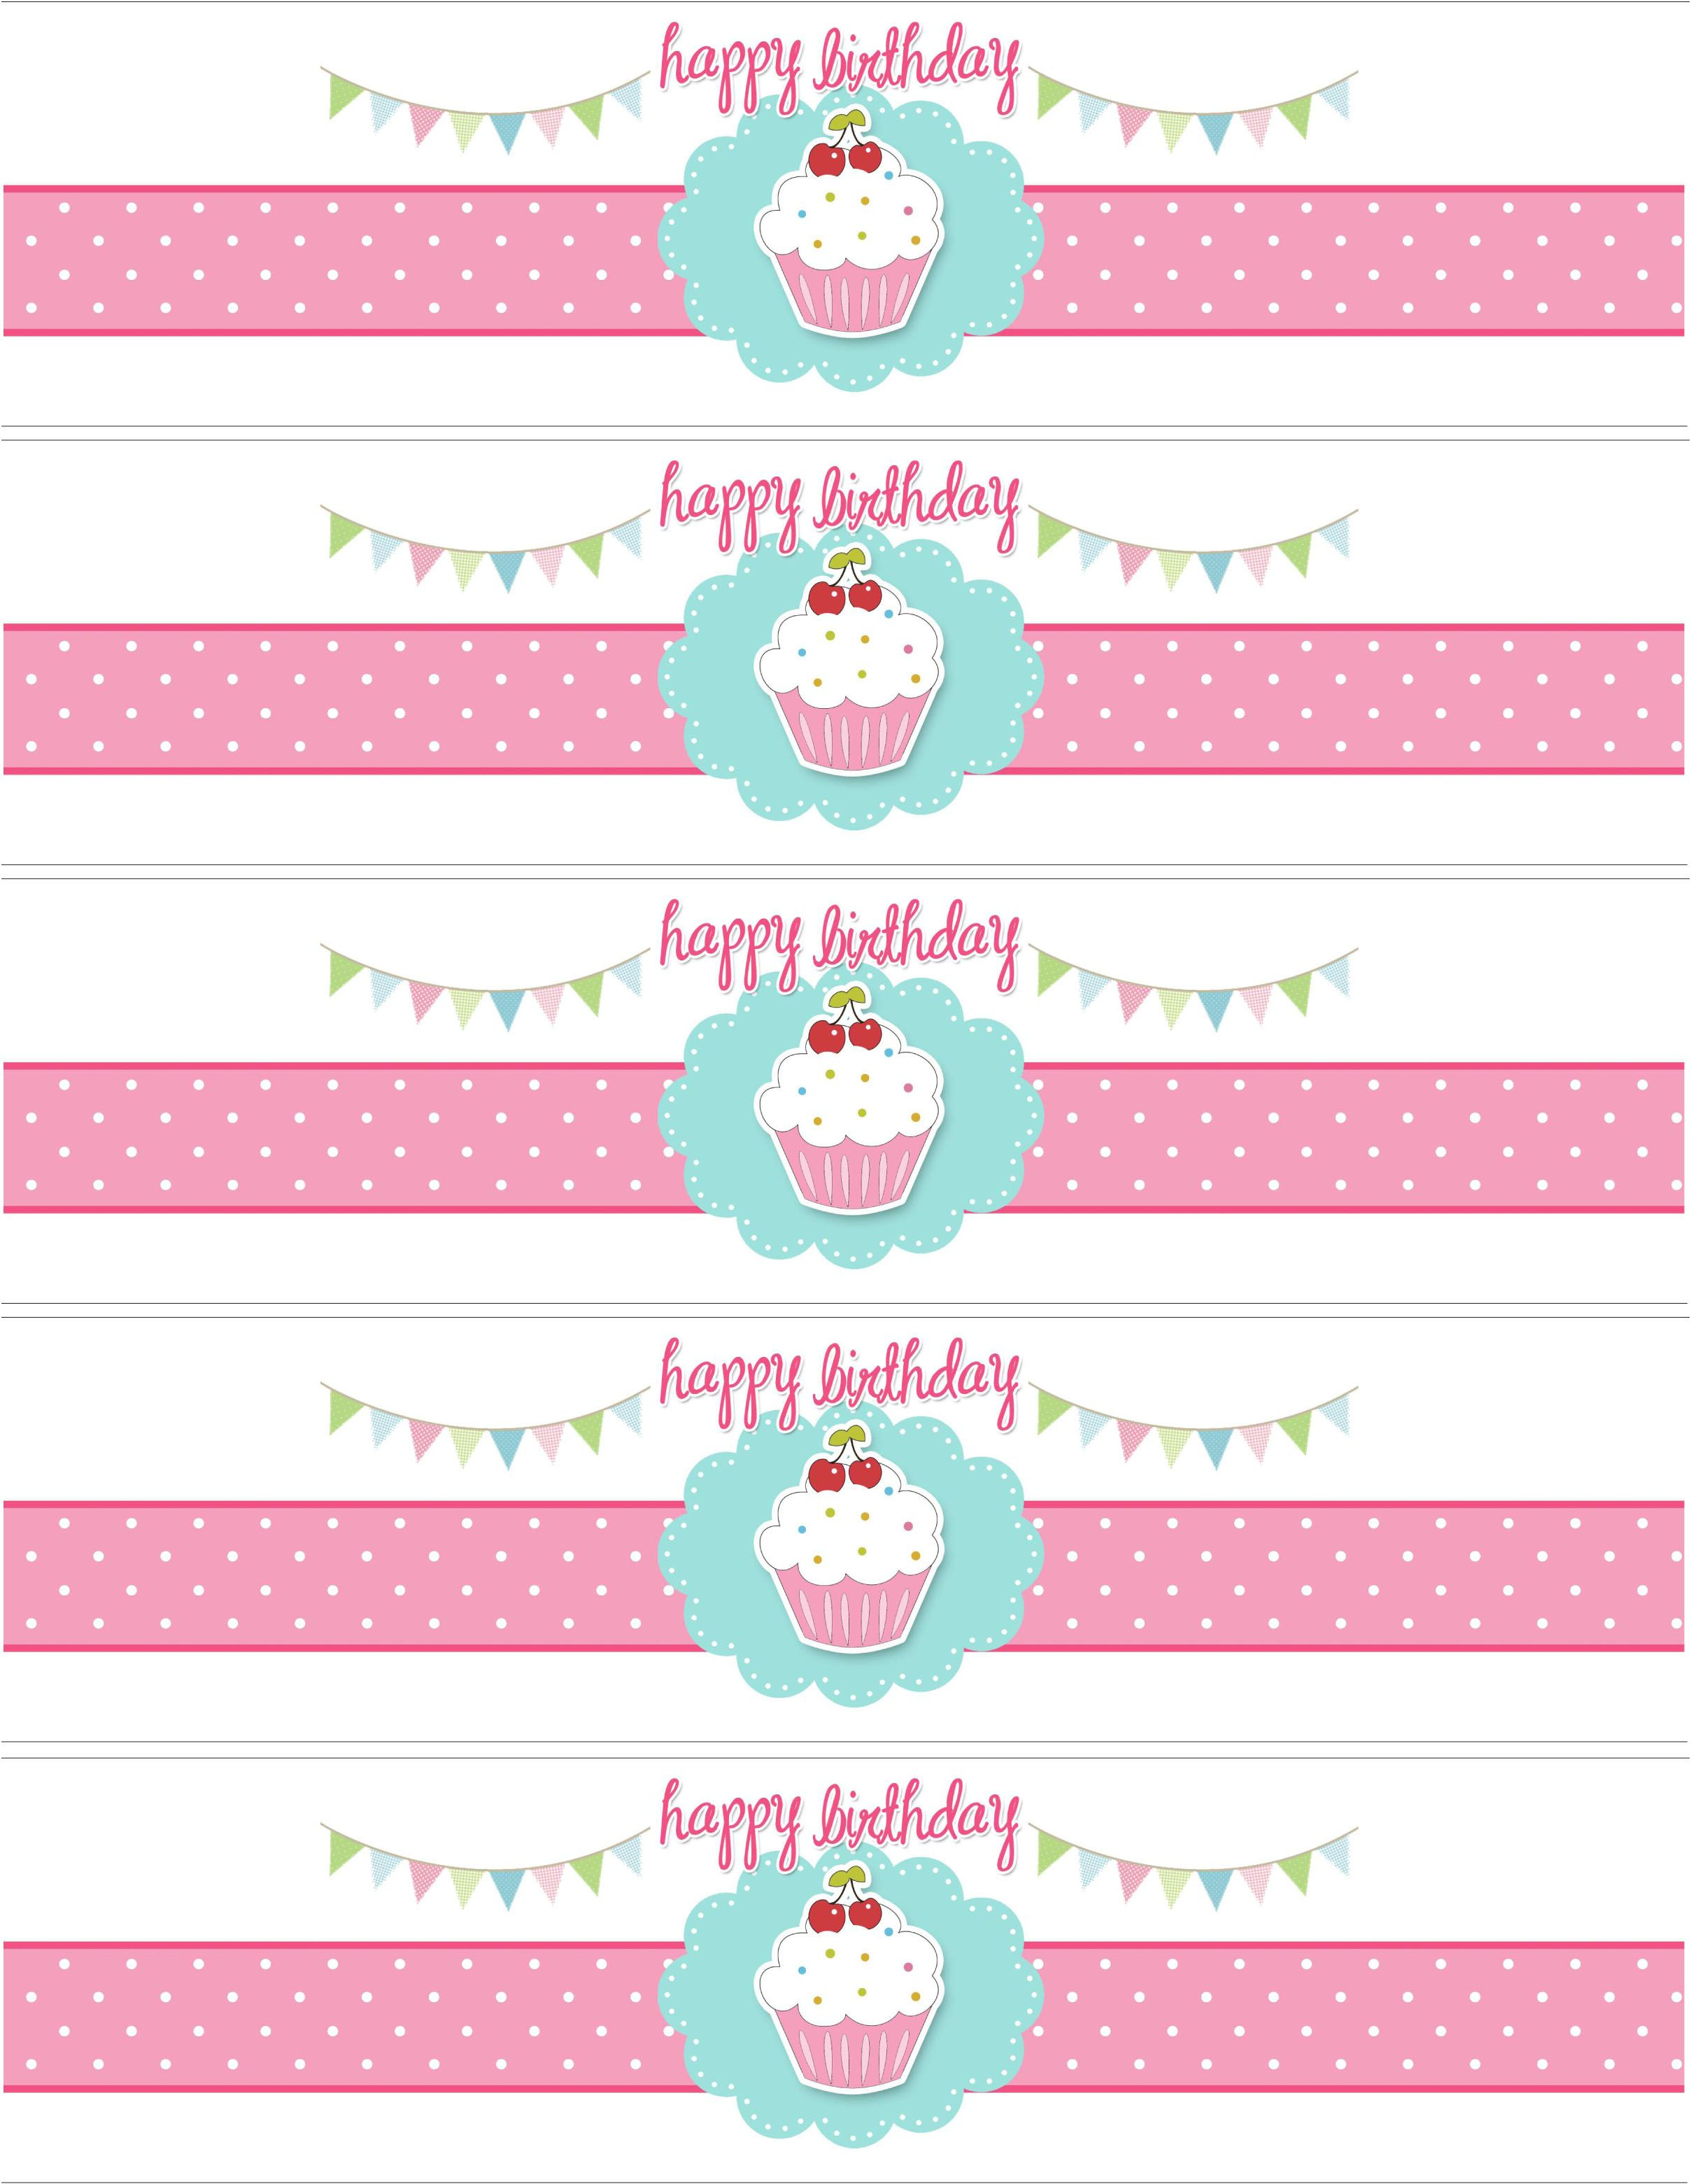 Cupcake Birthday Party With Free Printables | Diy Birthday Party - Free Printable Water Bottle Labels For Birthday